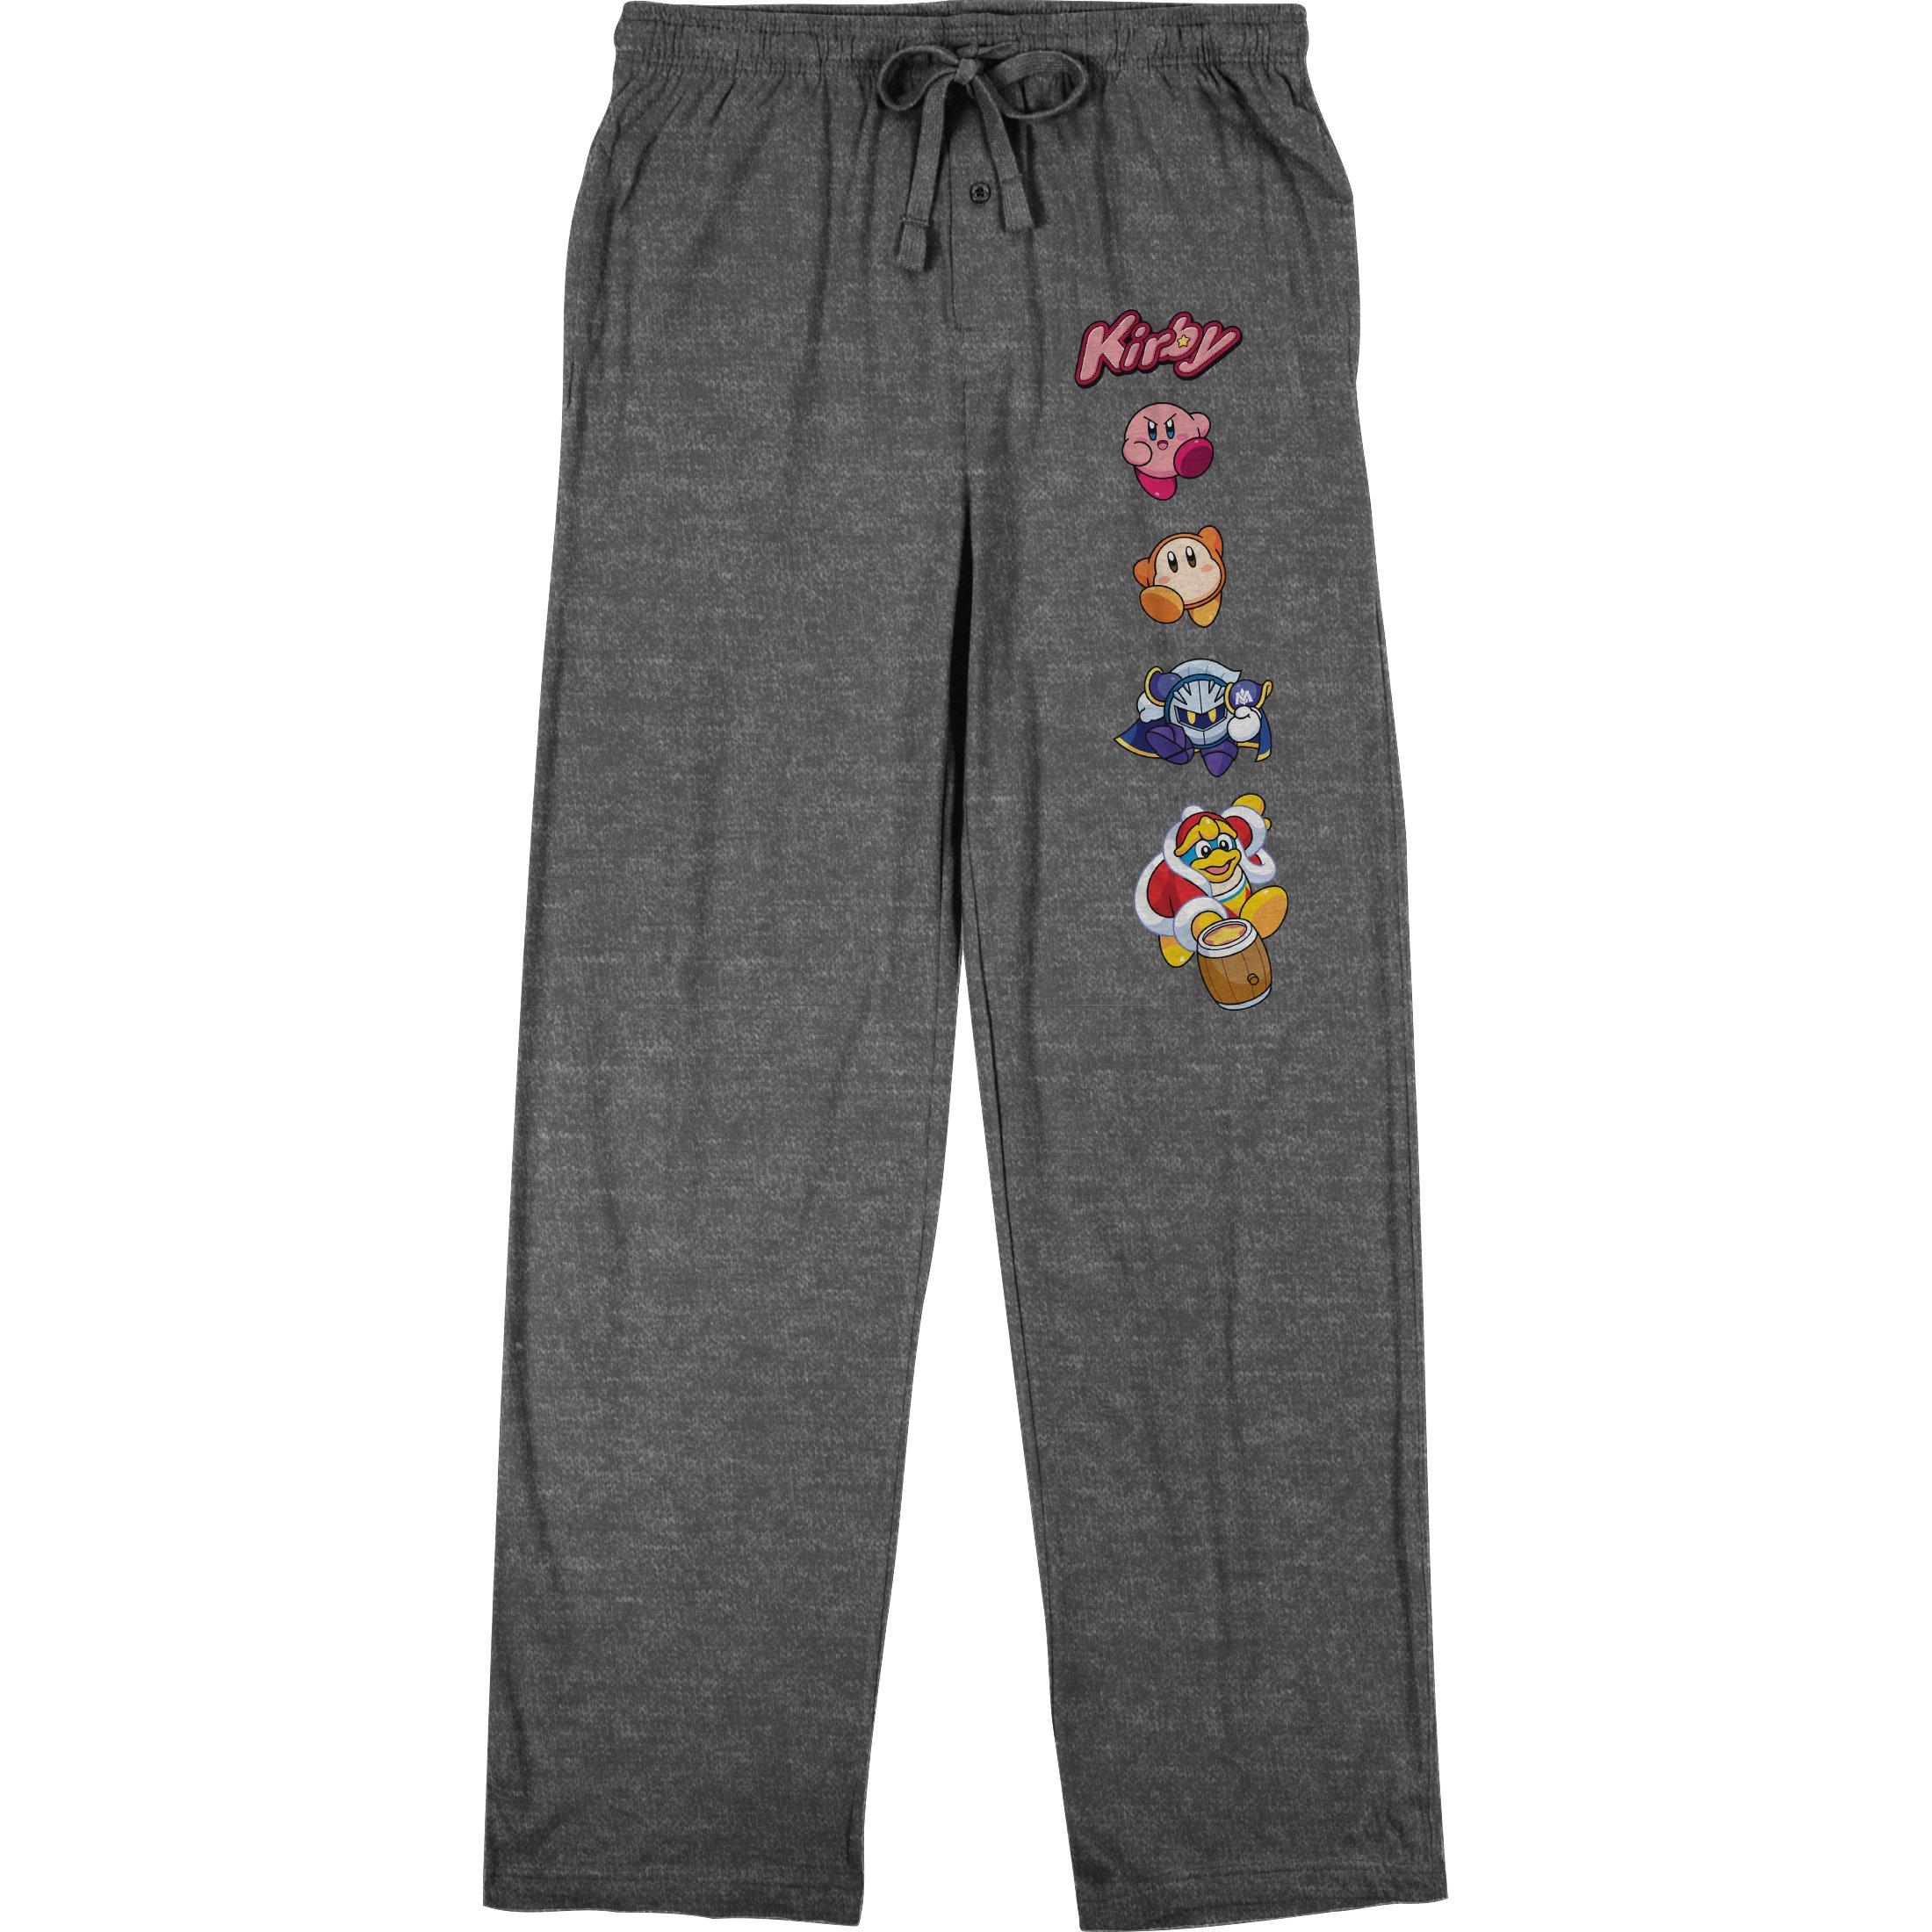 Kirby Classic Video Game Men's Athletic Heather Gray Pajama Pants, Size: Small, Bioworld Merchandising